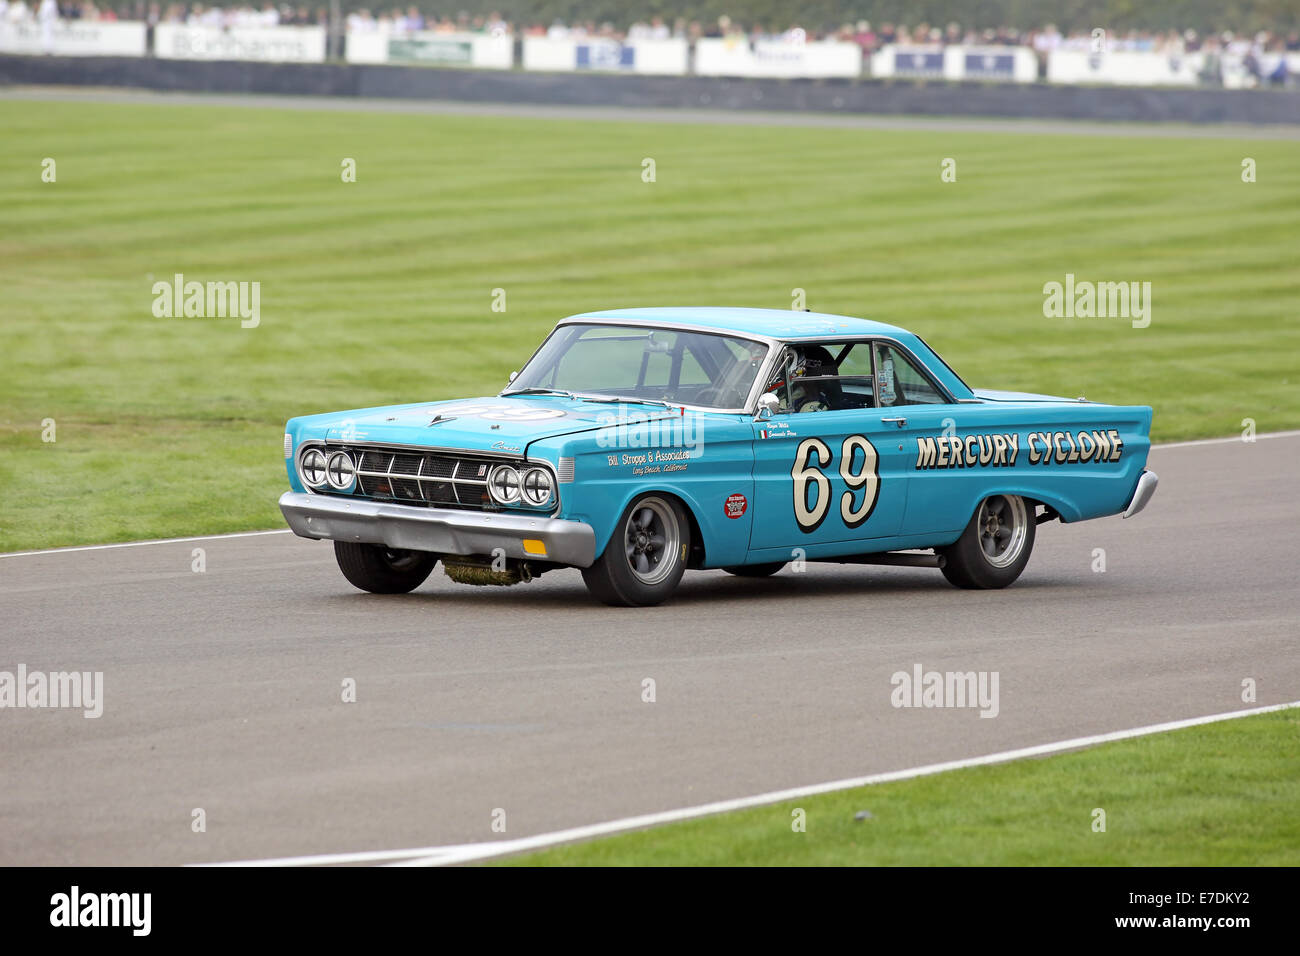 Chichester, West Sussex, UK. 13th Sep, 2014. Pictures from the Goodwood Revival 2014 - The Shelby Cup - A race for saloon cars powered by small-block V8 engines on the 60th anniversary of the small-block V8 engine. A large number of Ford Mustangs mariking the car's 50th anniversary took on other American classics such as Ford Falcon, Plymouth Barracuda, Mercury Comet Cyclone and Dodge Dart. Picture shows: Emanuele Pirro driving a 1964 Mercury Comet Cyclone Credit:  Oliver Dixon/Alamy Live News Stock Photo